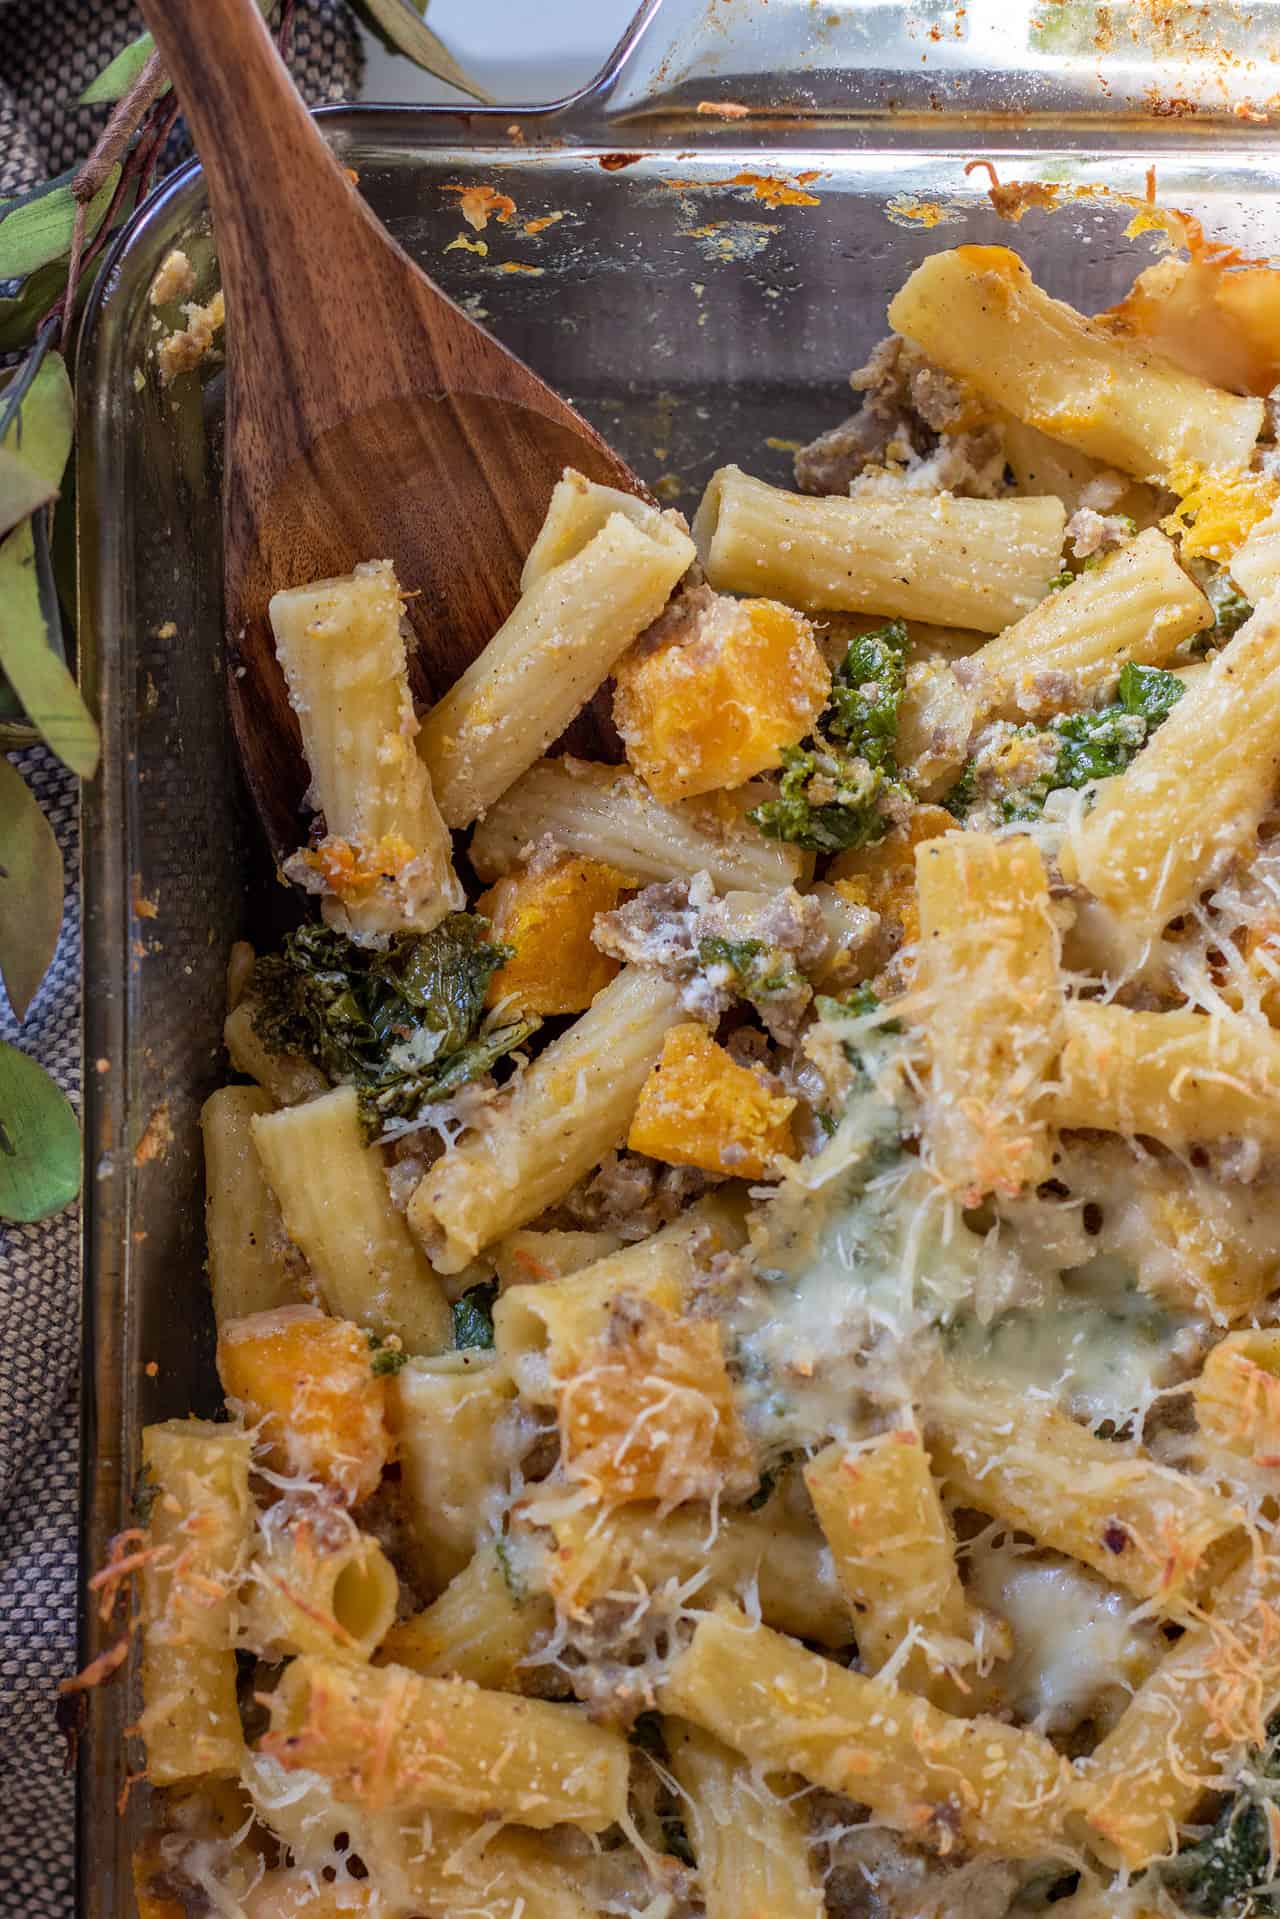 A glass baking dish filled with butternut squash pasta, sausage and kale. There's a wooden serving spoon taking a piece of the pasta.